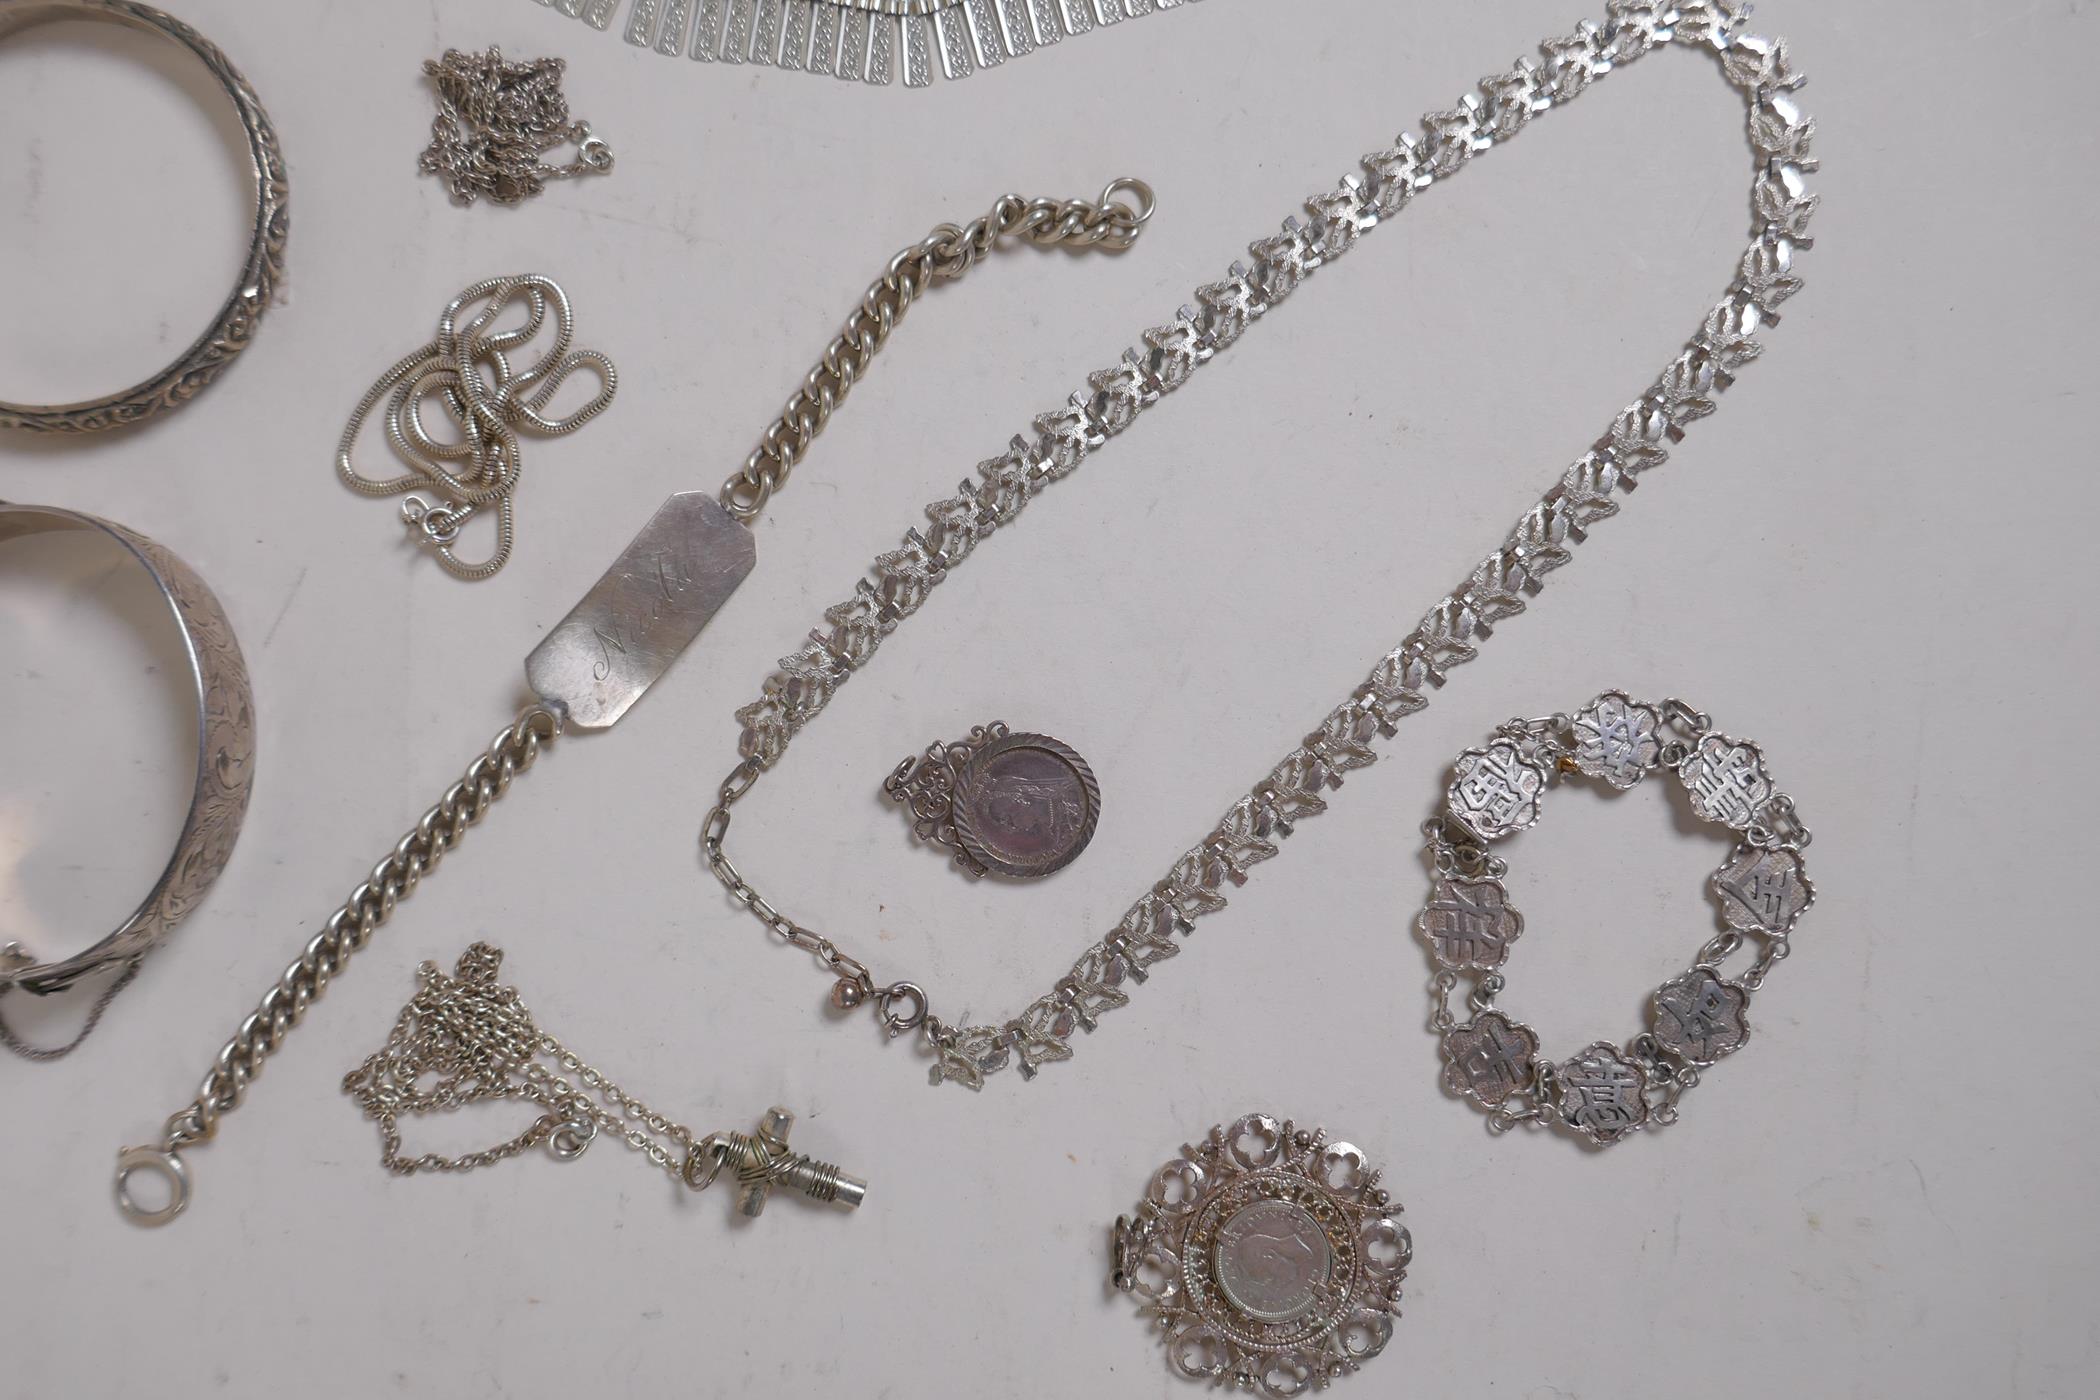 A collection of hallmarked silver jewellery, bangles, chains and necklaces, 199g - Image 4 of 7